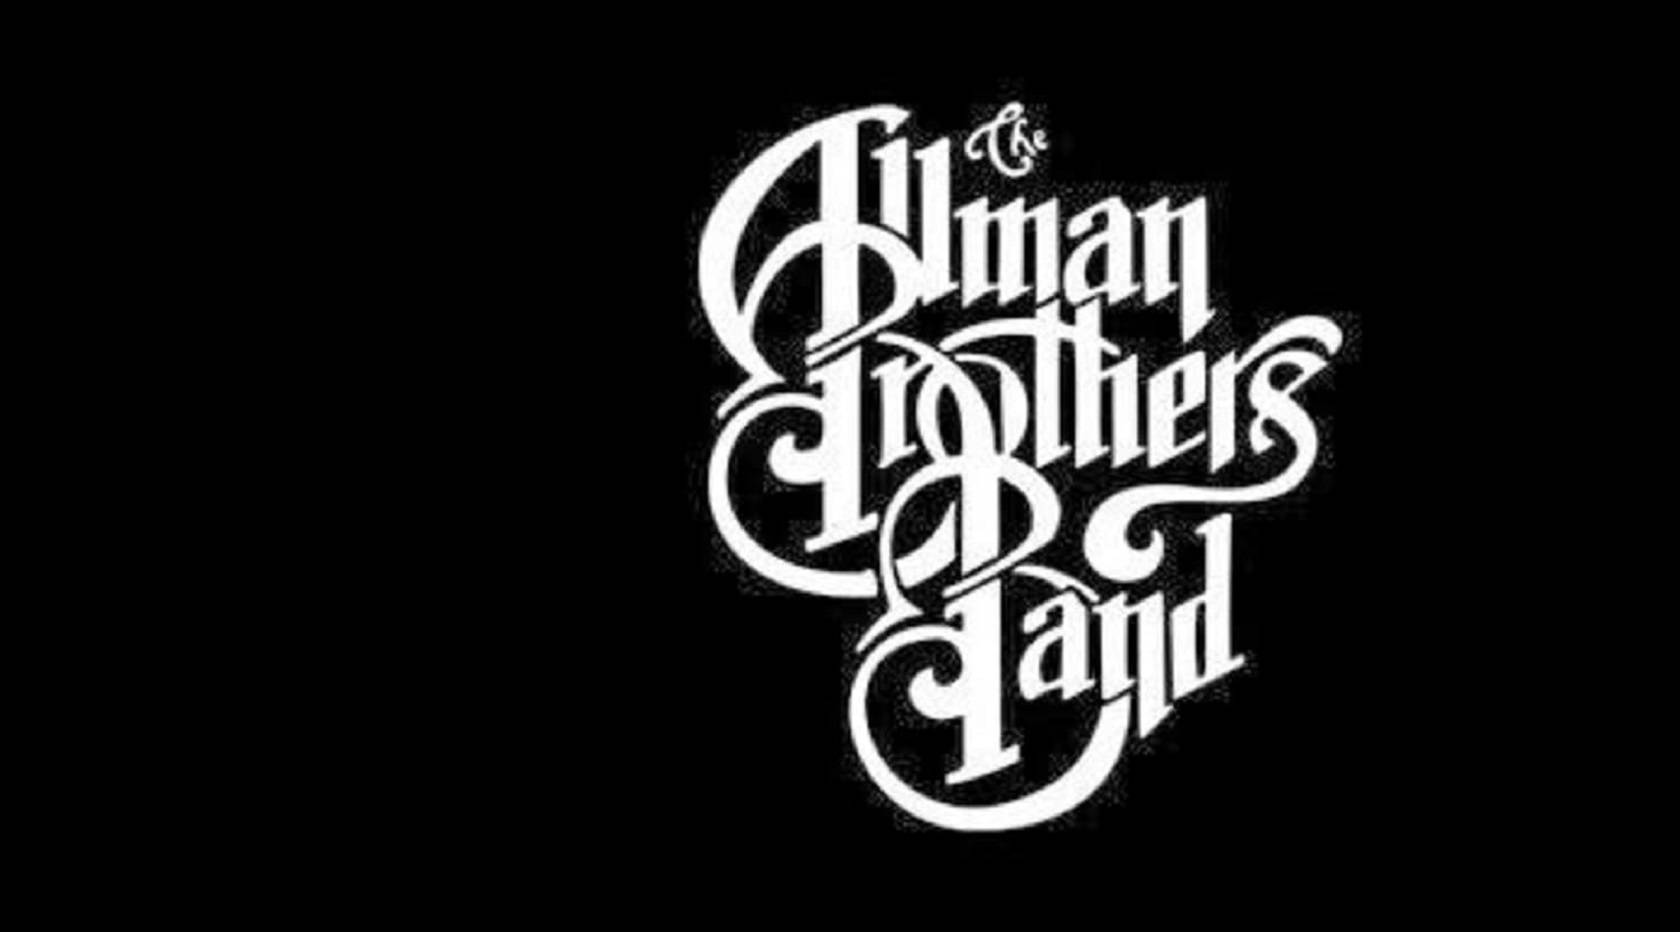 Good Clean Fun Album By Allman Brothers Band Wallpaper